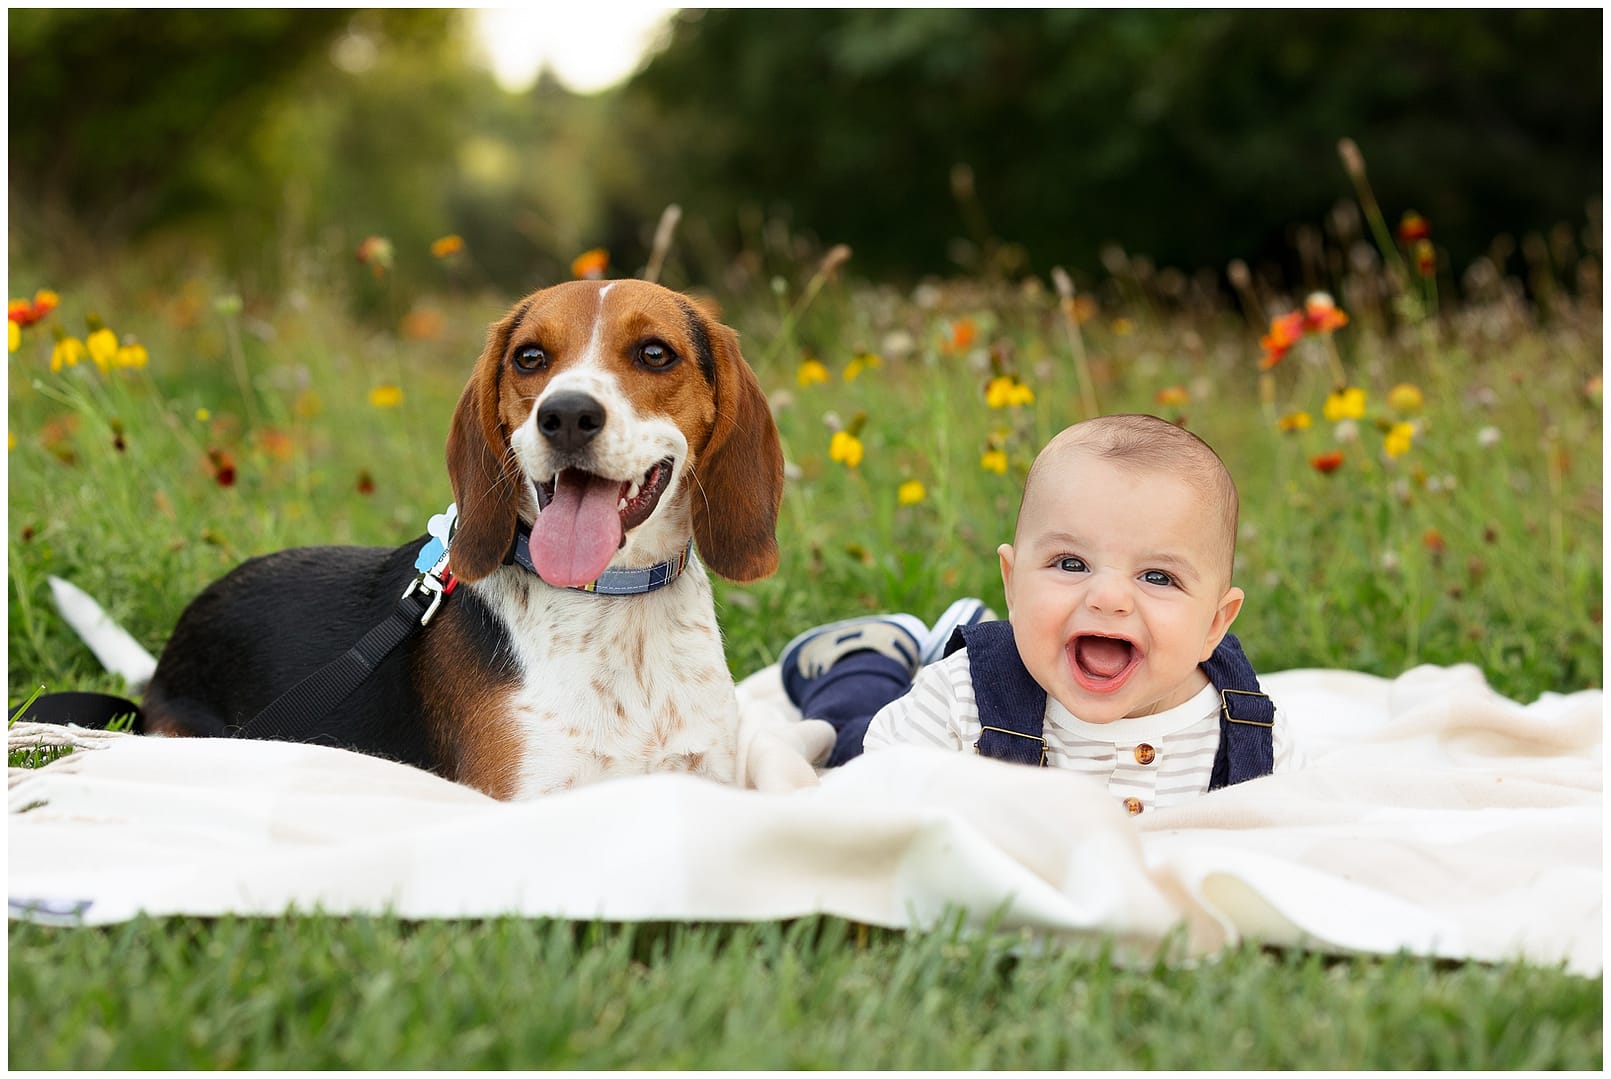 Baby boy and his dog smile for camera. Photo by Tiffany Hix Photography.